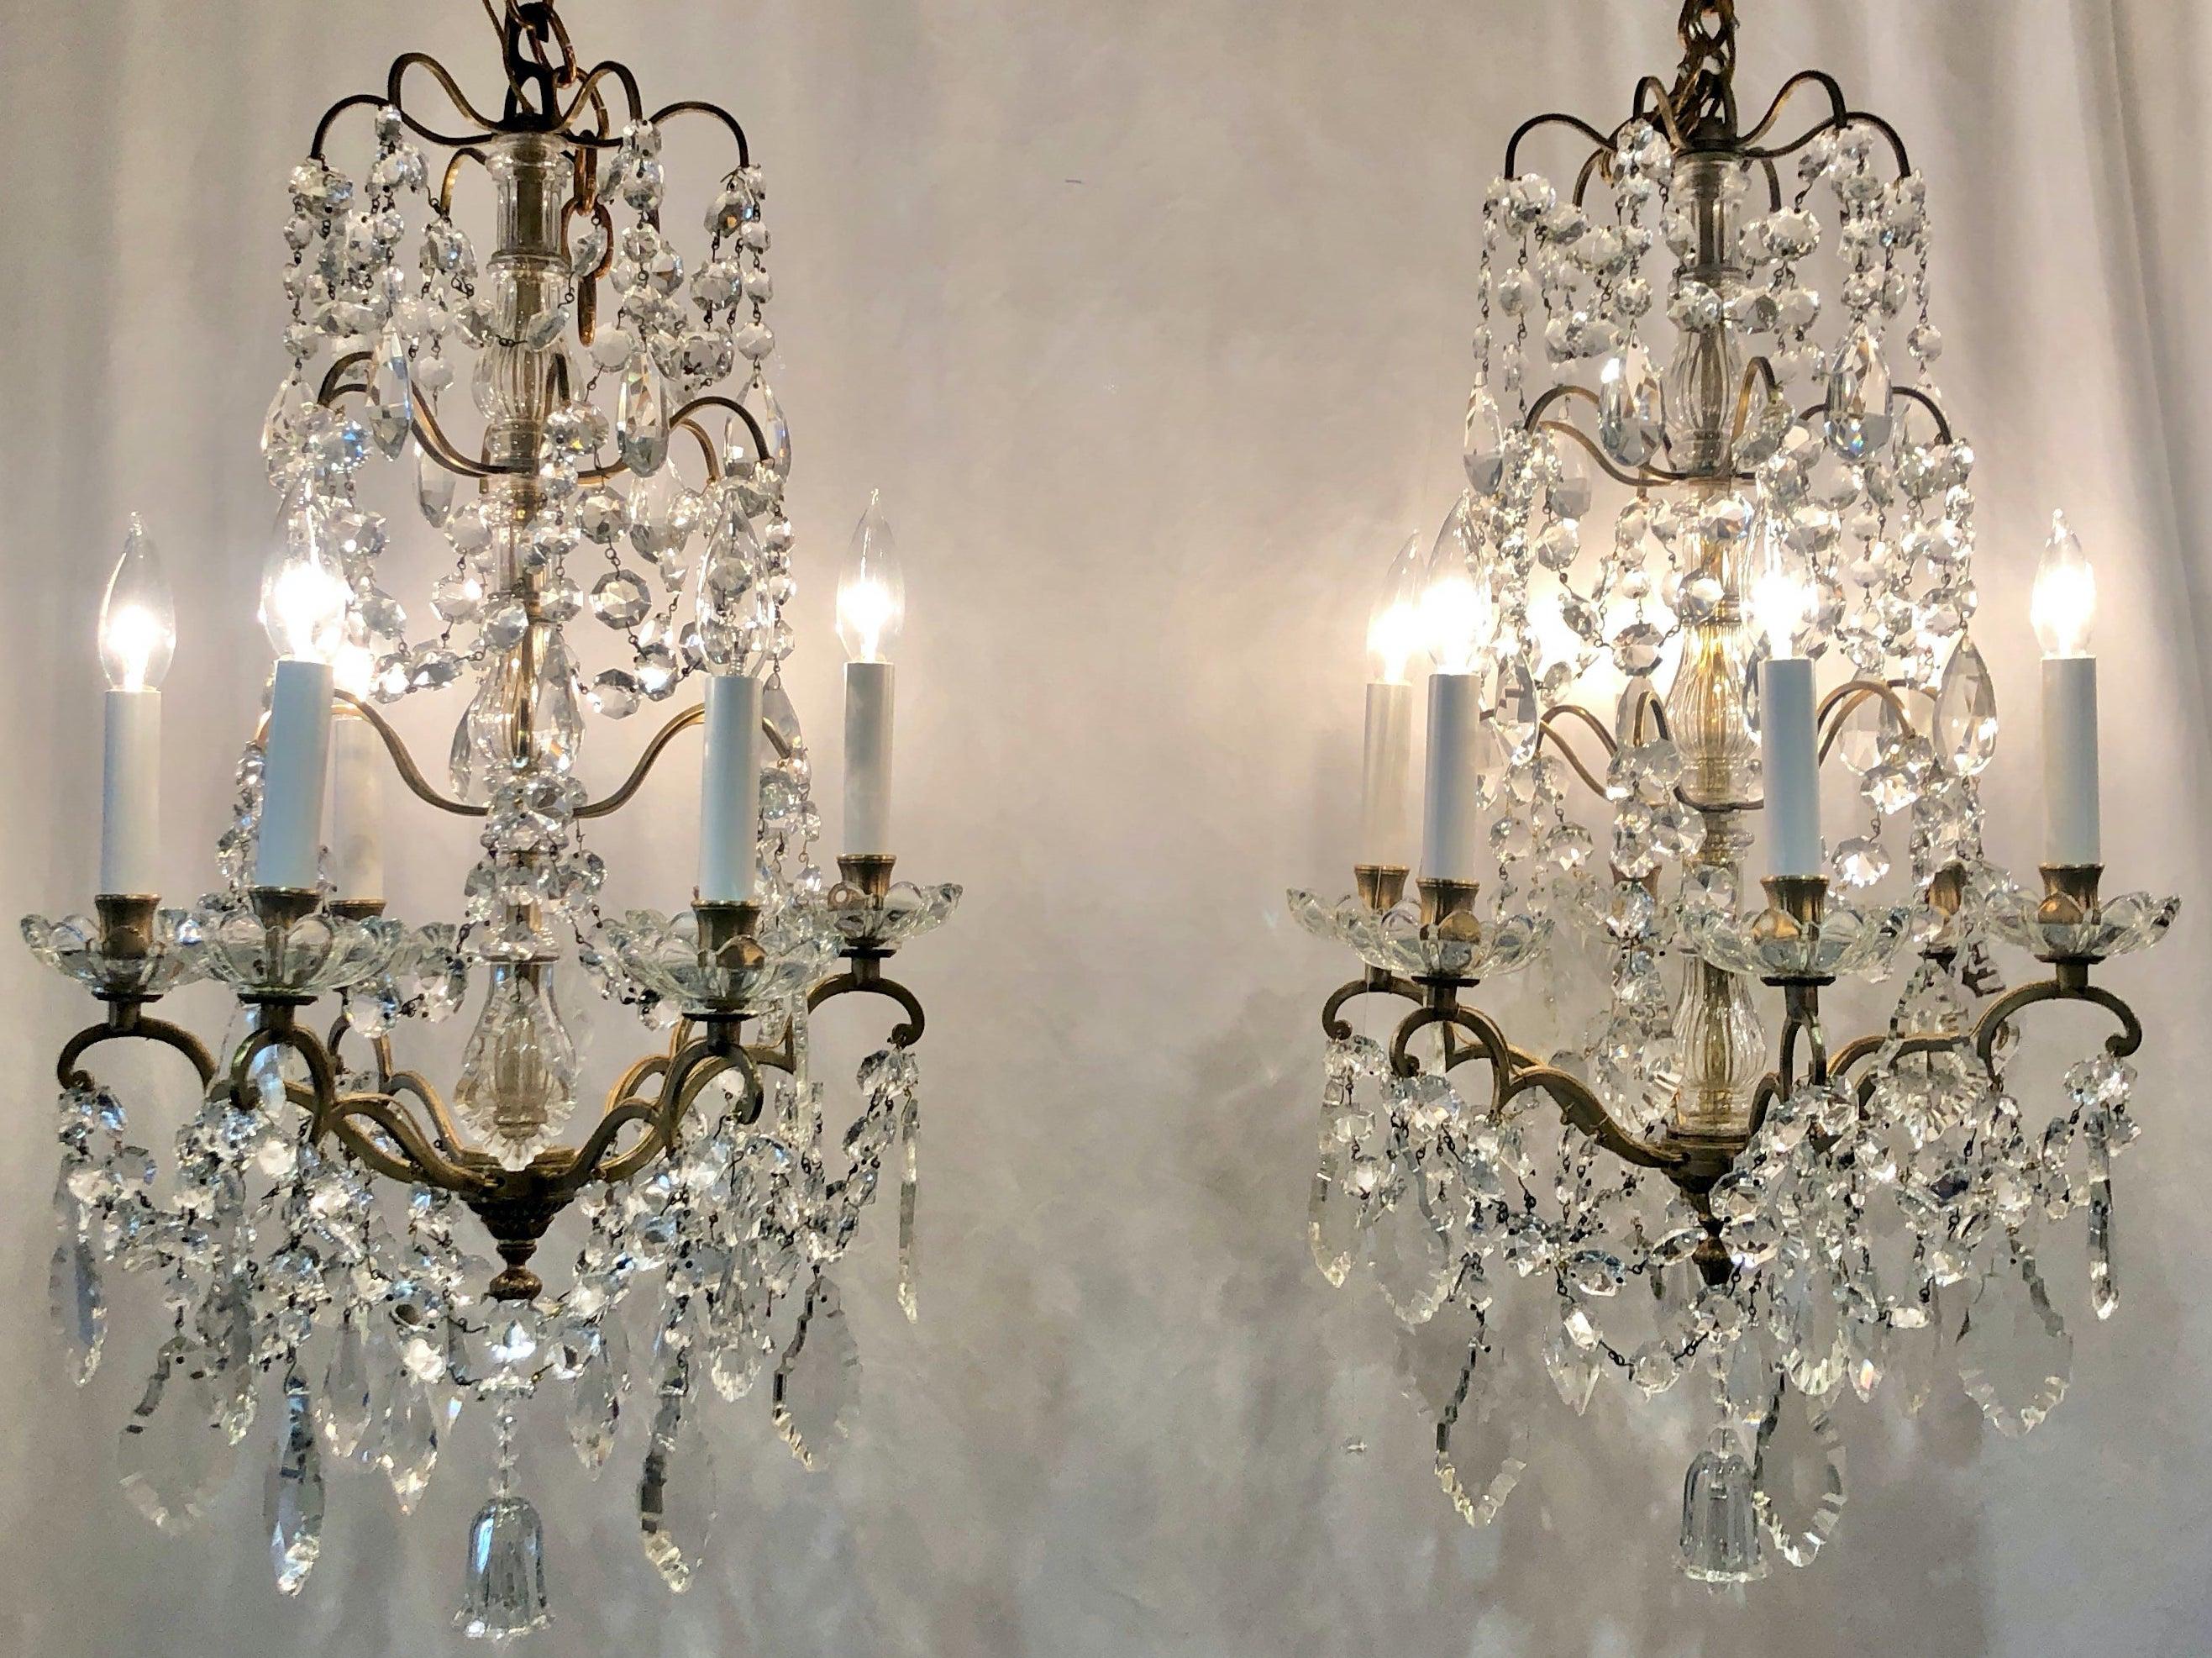 Pair antique French gold bronze and crystal chandelier, Circa 1910-1920.